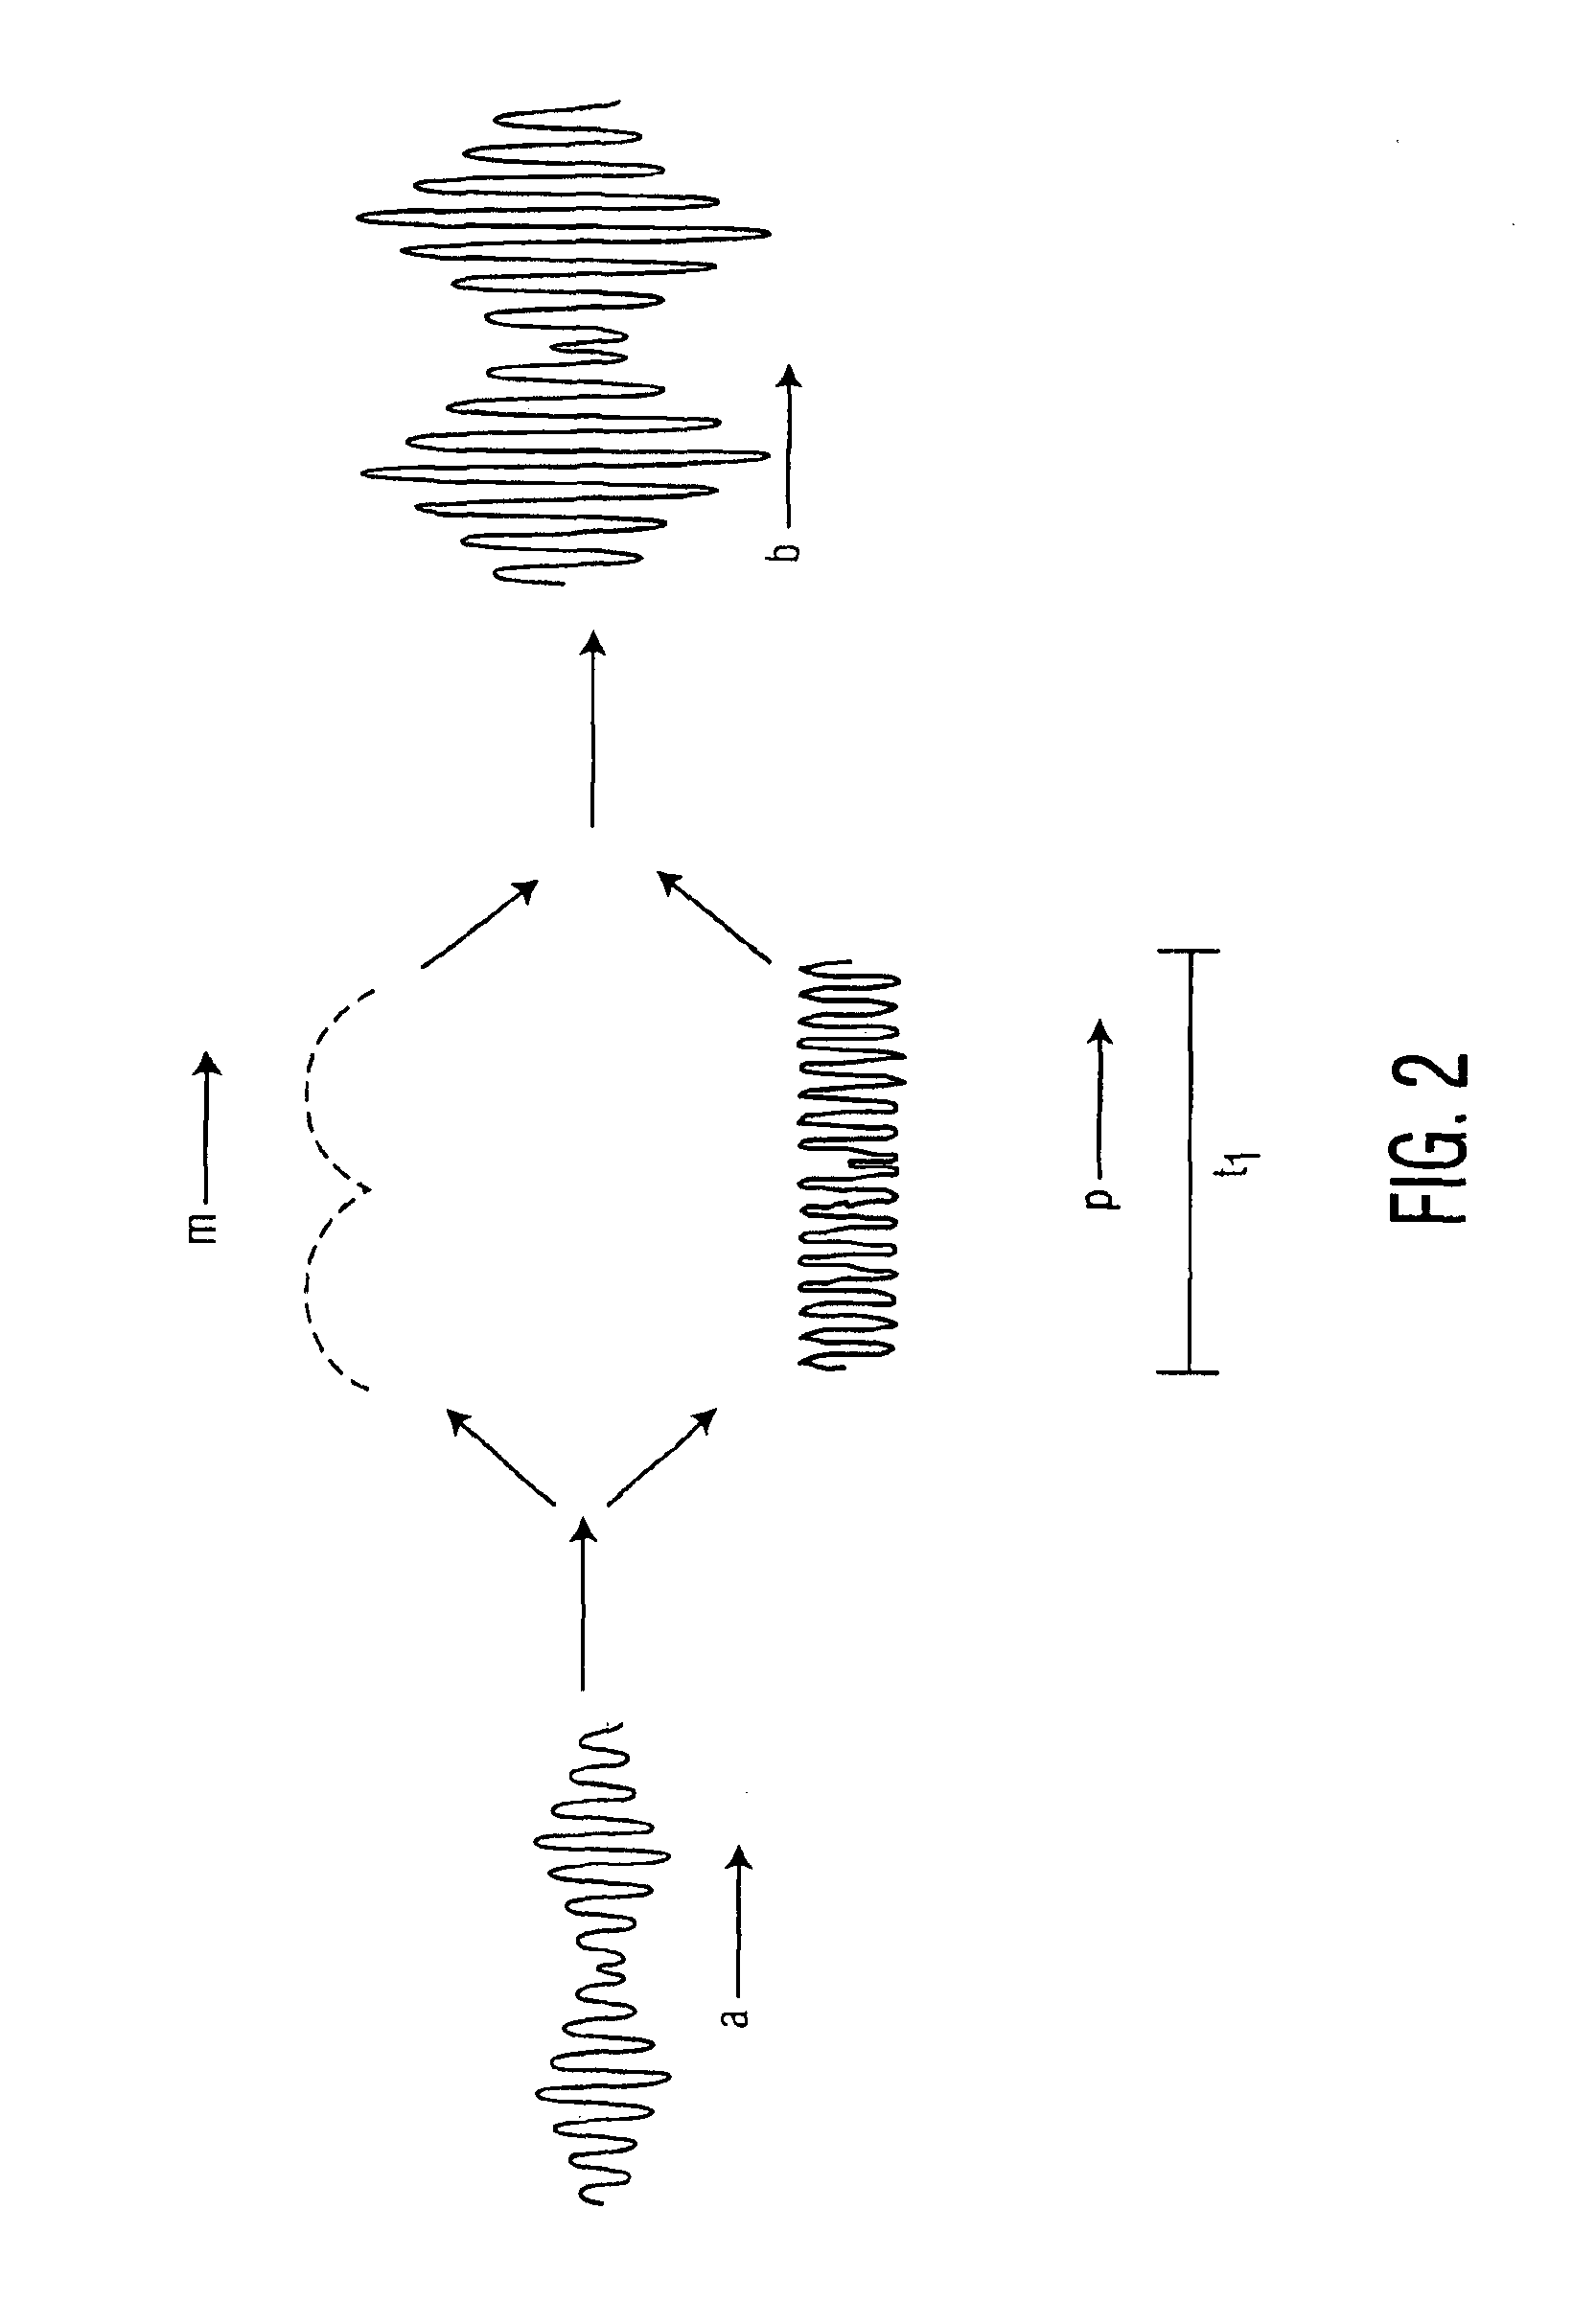 Apparatus, methods and articles of manufacture for electromagnetic processing